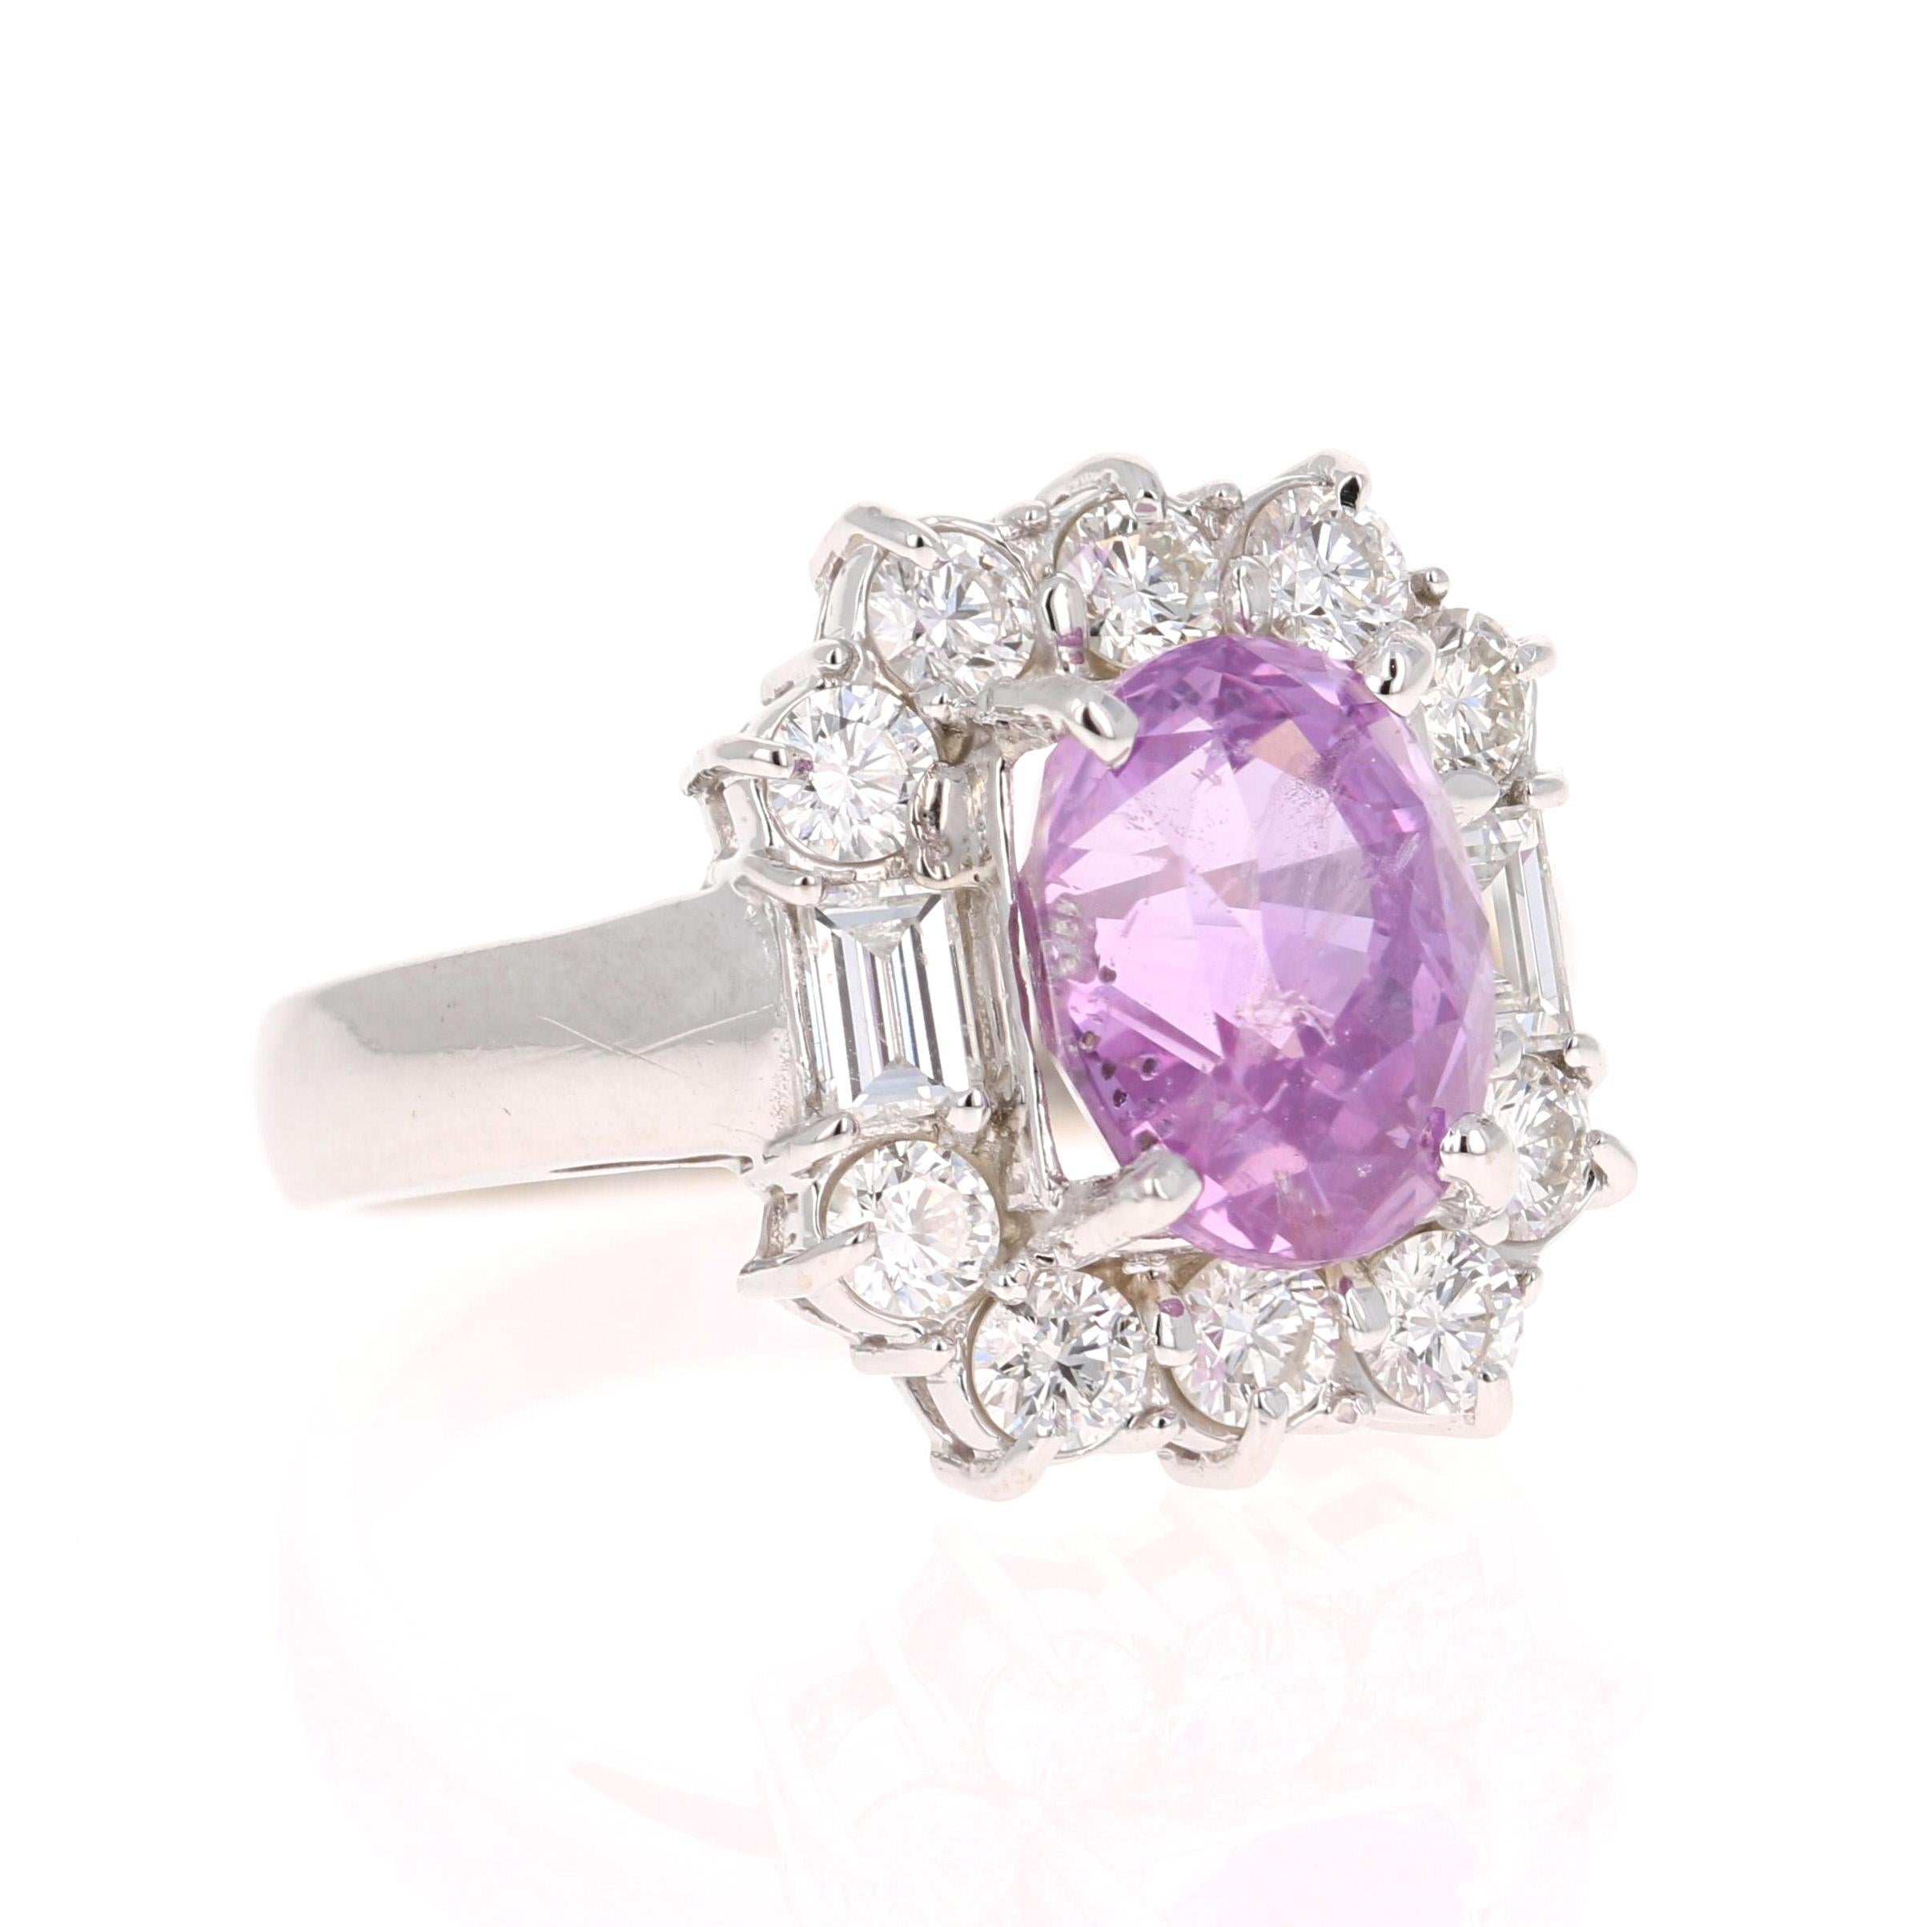 This beautiful ring has a Oval Cut Pink Sapphire that weighs 3.61 Carat. The Pink Sapphire has a beautiful vivid pink color that is rare and valued. The Pink Sapphire has no indications of Heat and is GIA Certified. The Certificate number is: